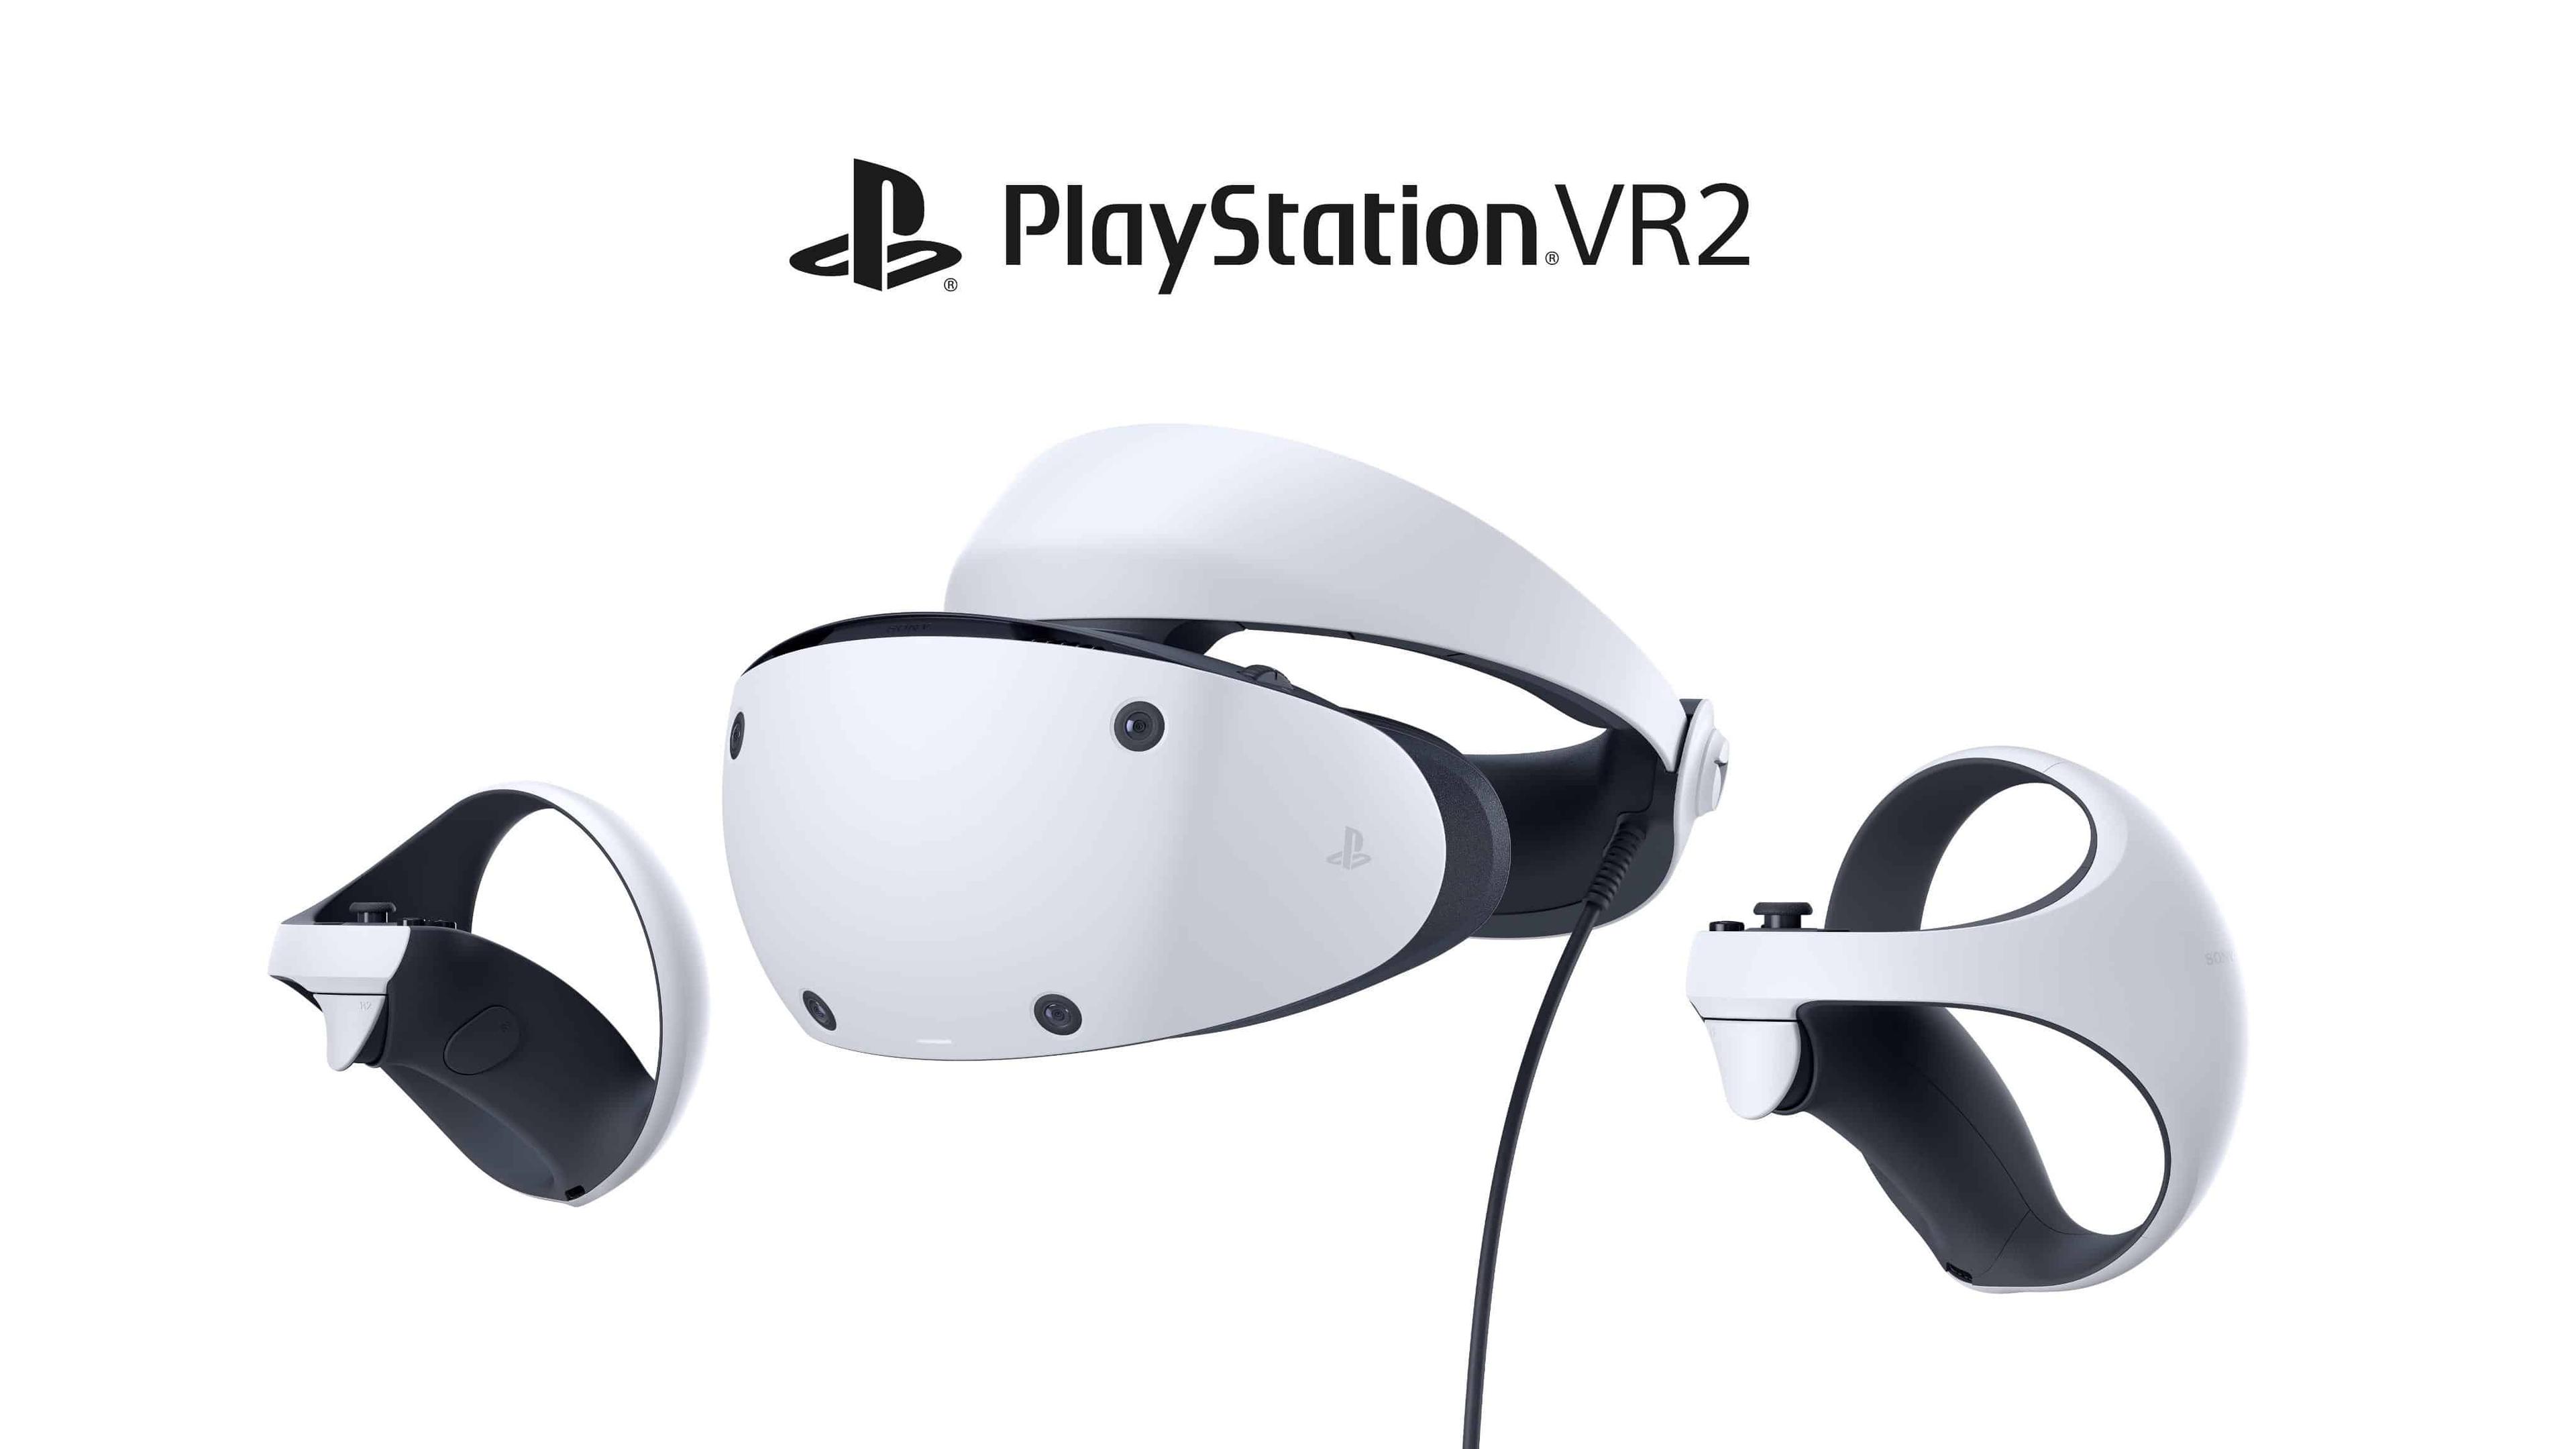 PlayStation VR2 Finally Launched in India after 10 months, Priced